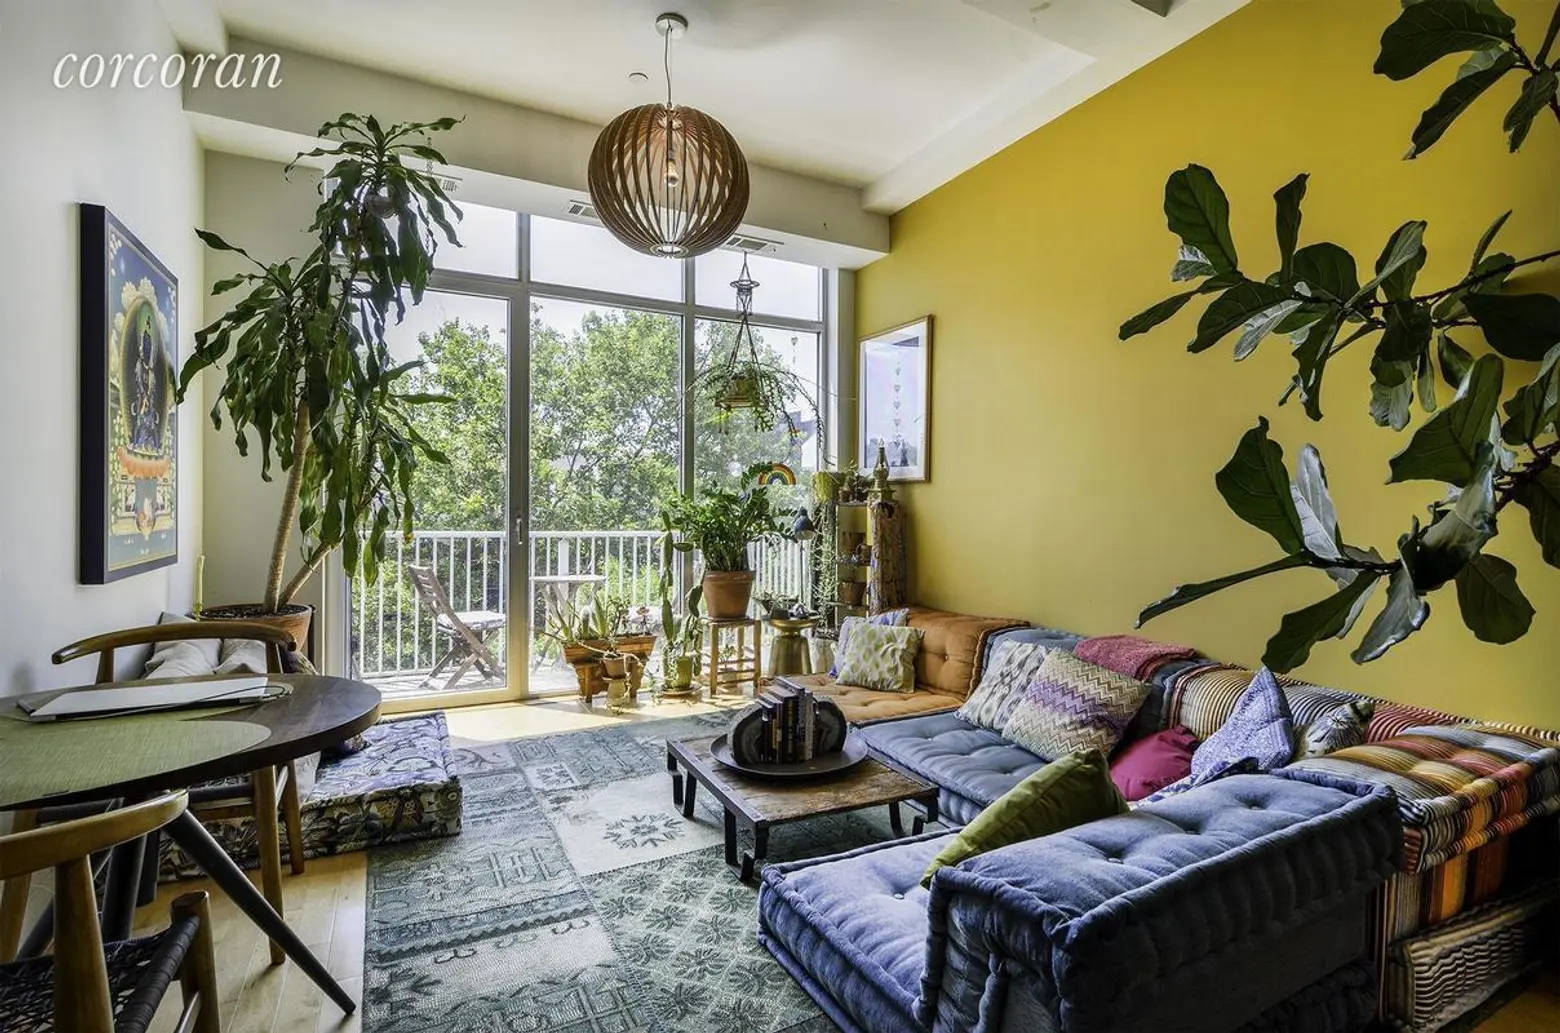 $3,250/month Williamsburg apartment comes furnished with chic, tropical decor